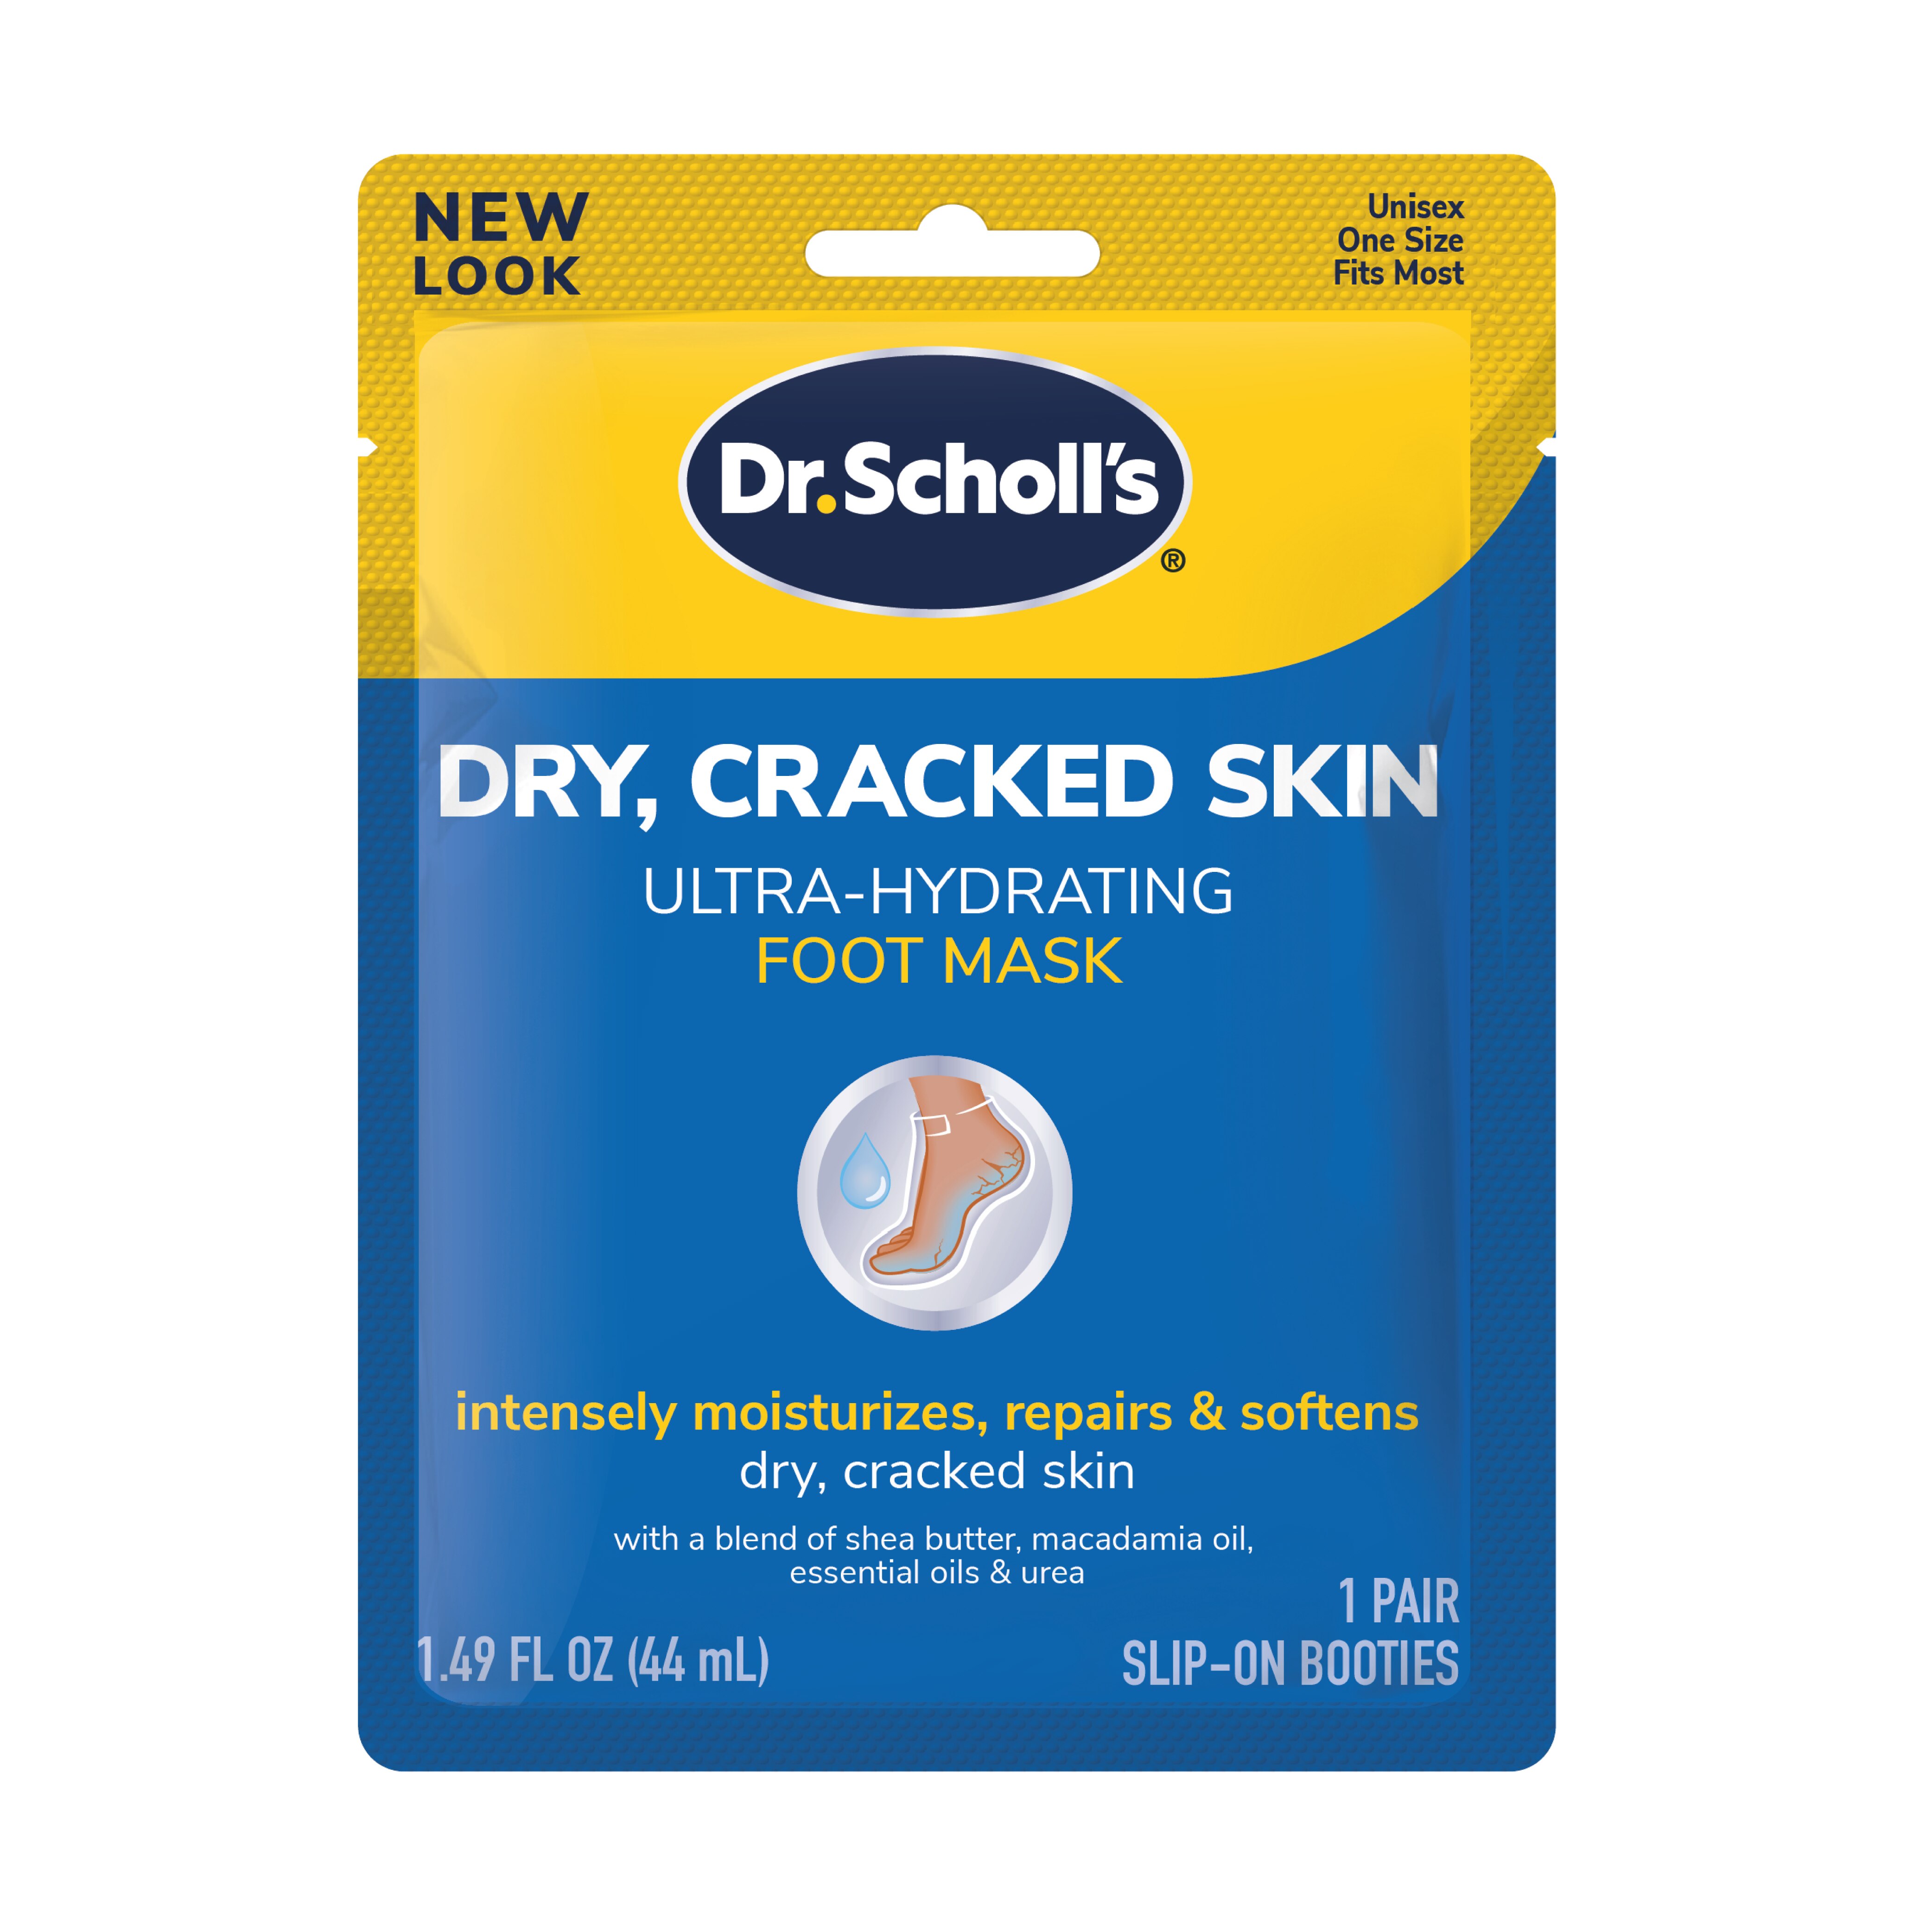 Dr. Scholl's Ultra Hydrating Foot Mask, 1 pair